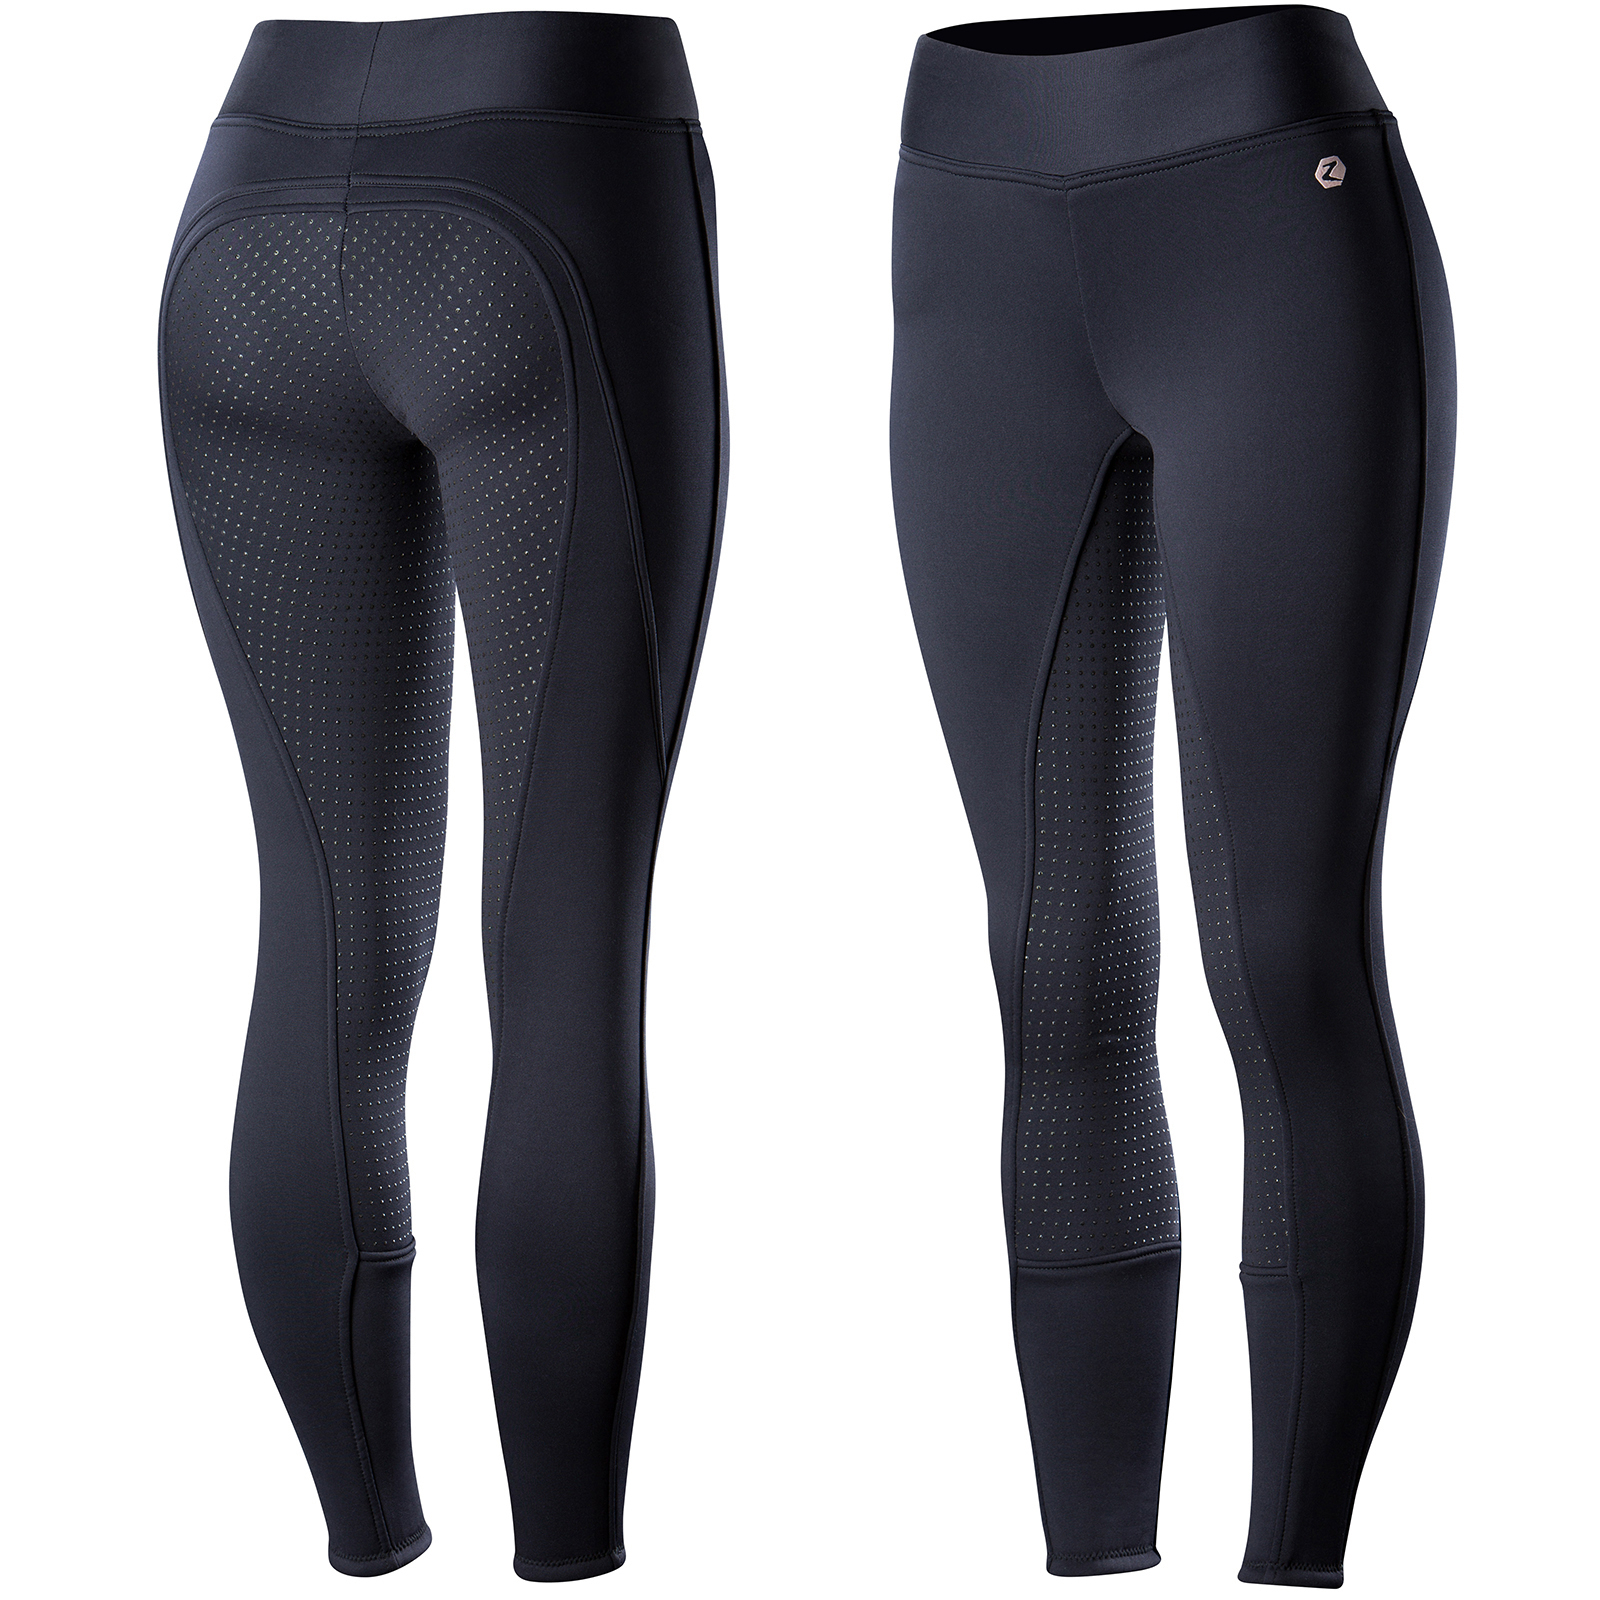 Tredstep 'Tempo Compression' Full Seat Tights in Navy - Women's 24R